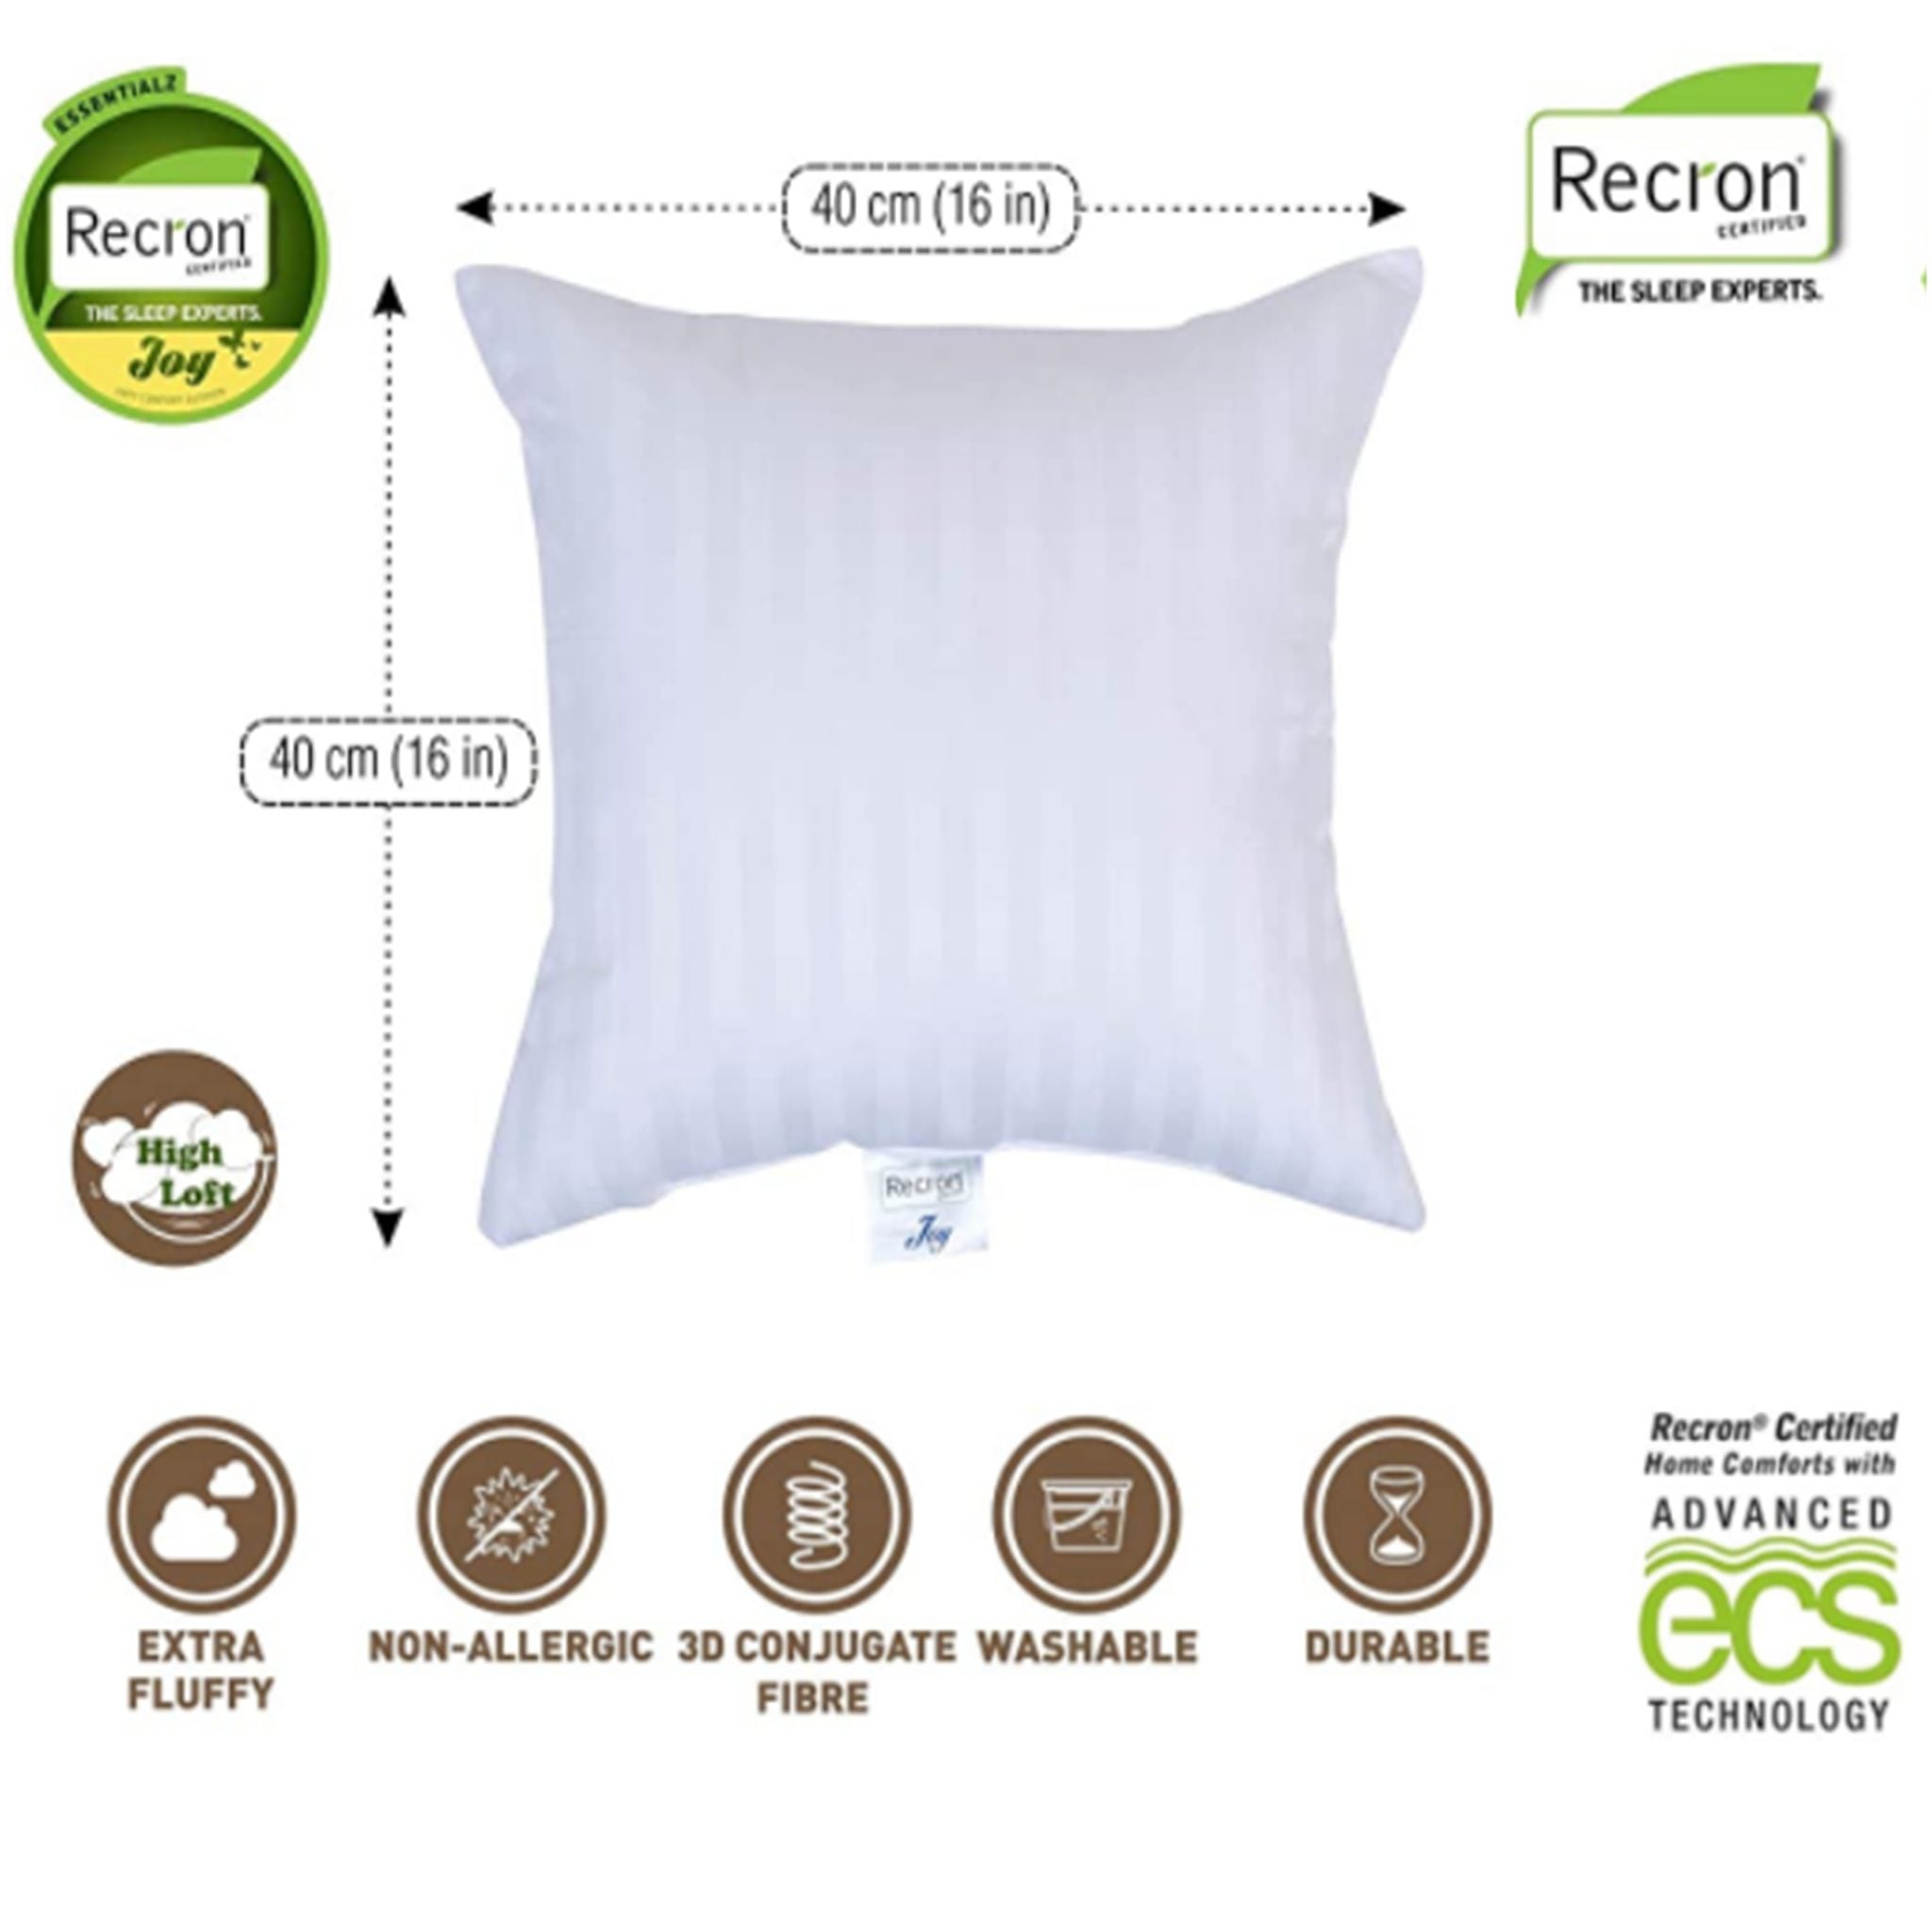 Recron Certified Square Cushion Cover/Filler